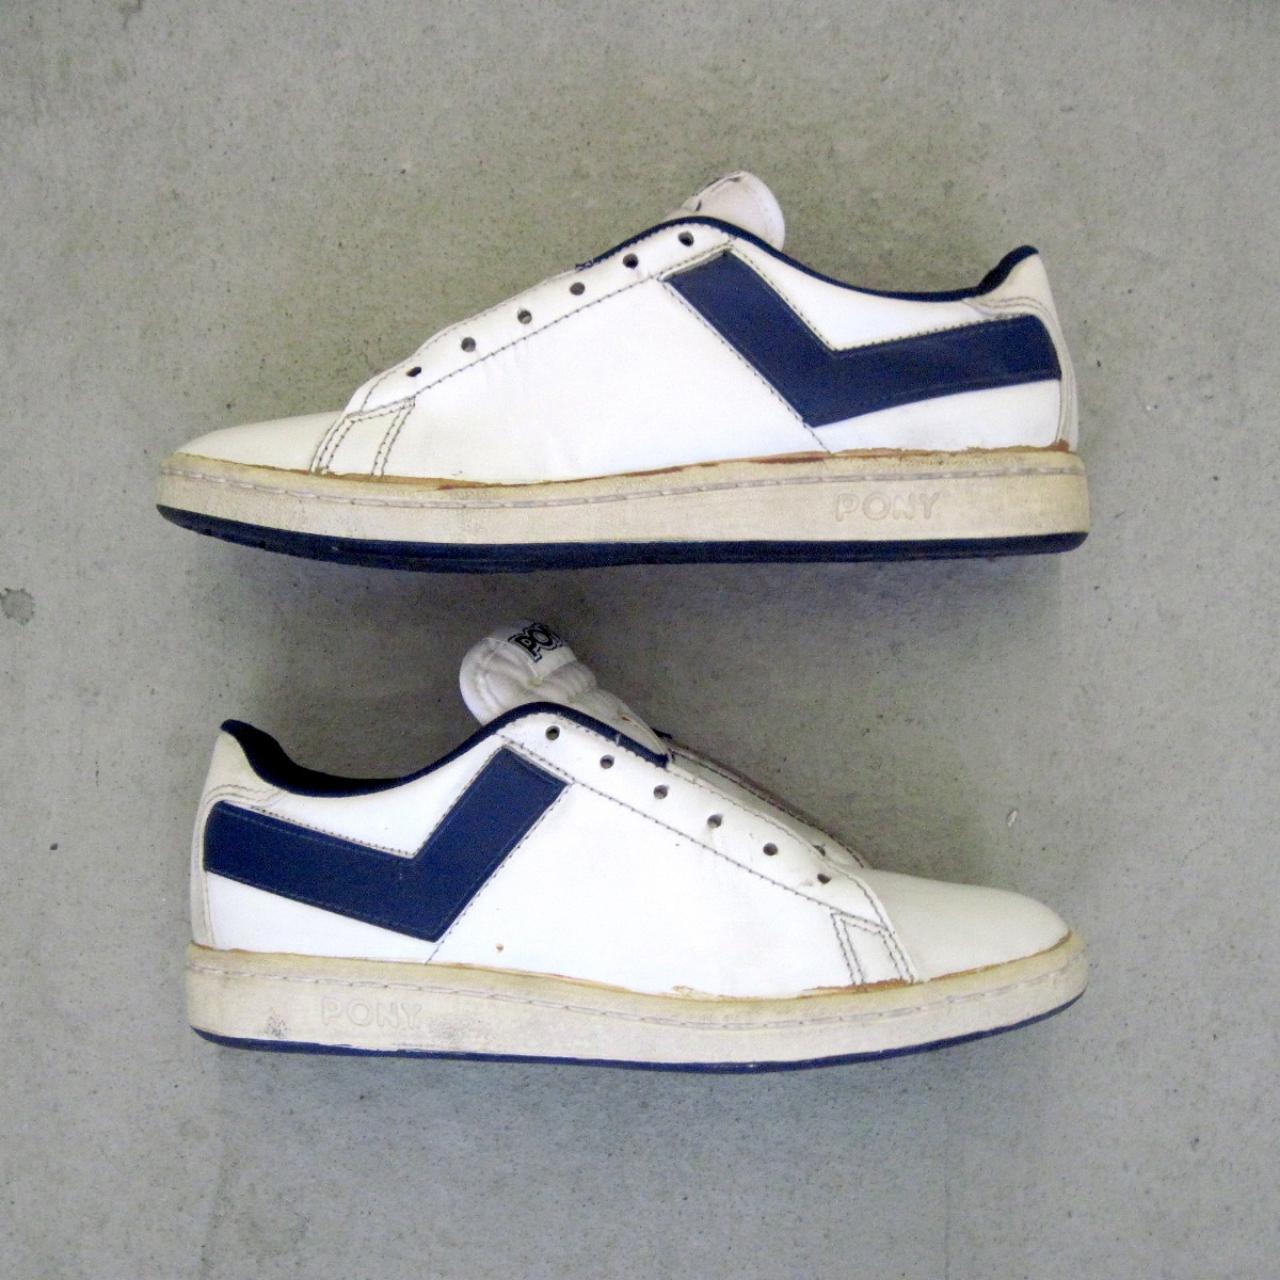 Pony Men's White and Navy Trainers